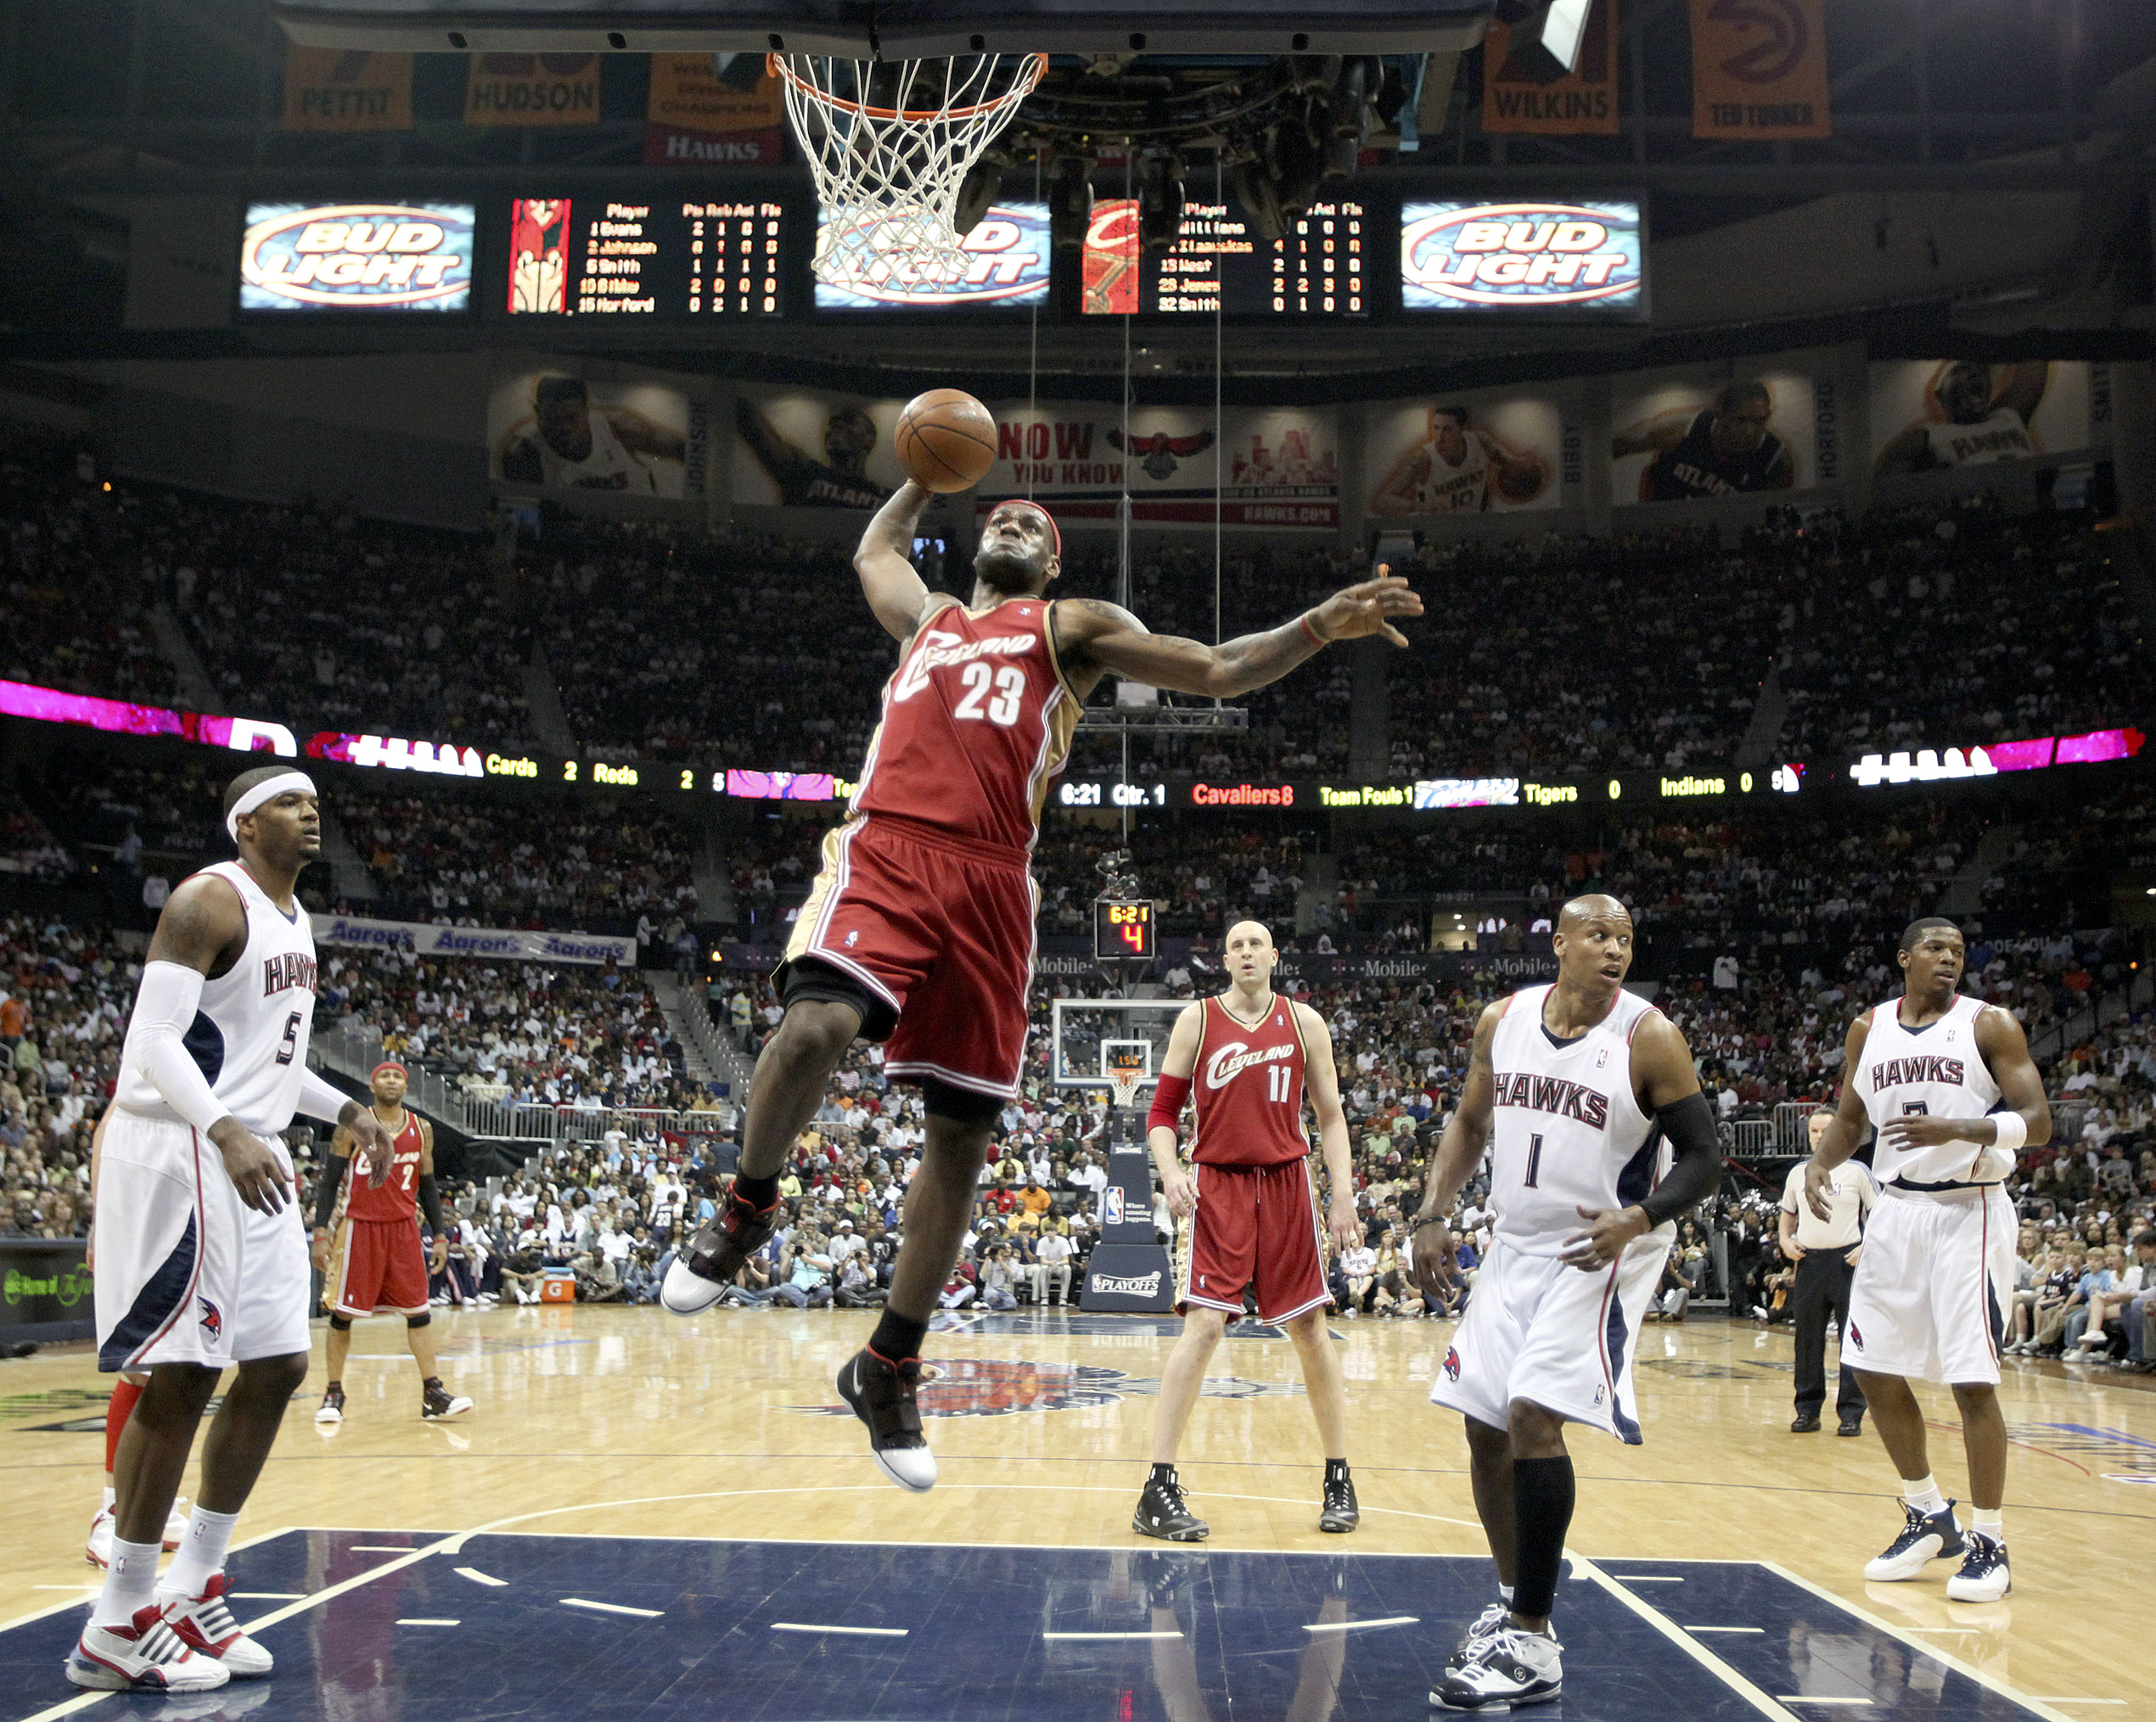 What a time! - LeBron James reminisces his iconic tomahawk dunk